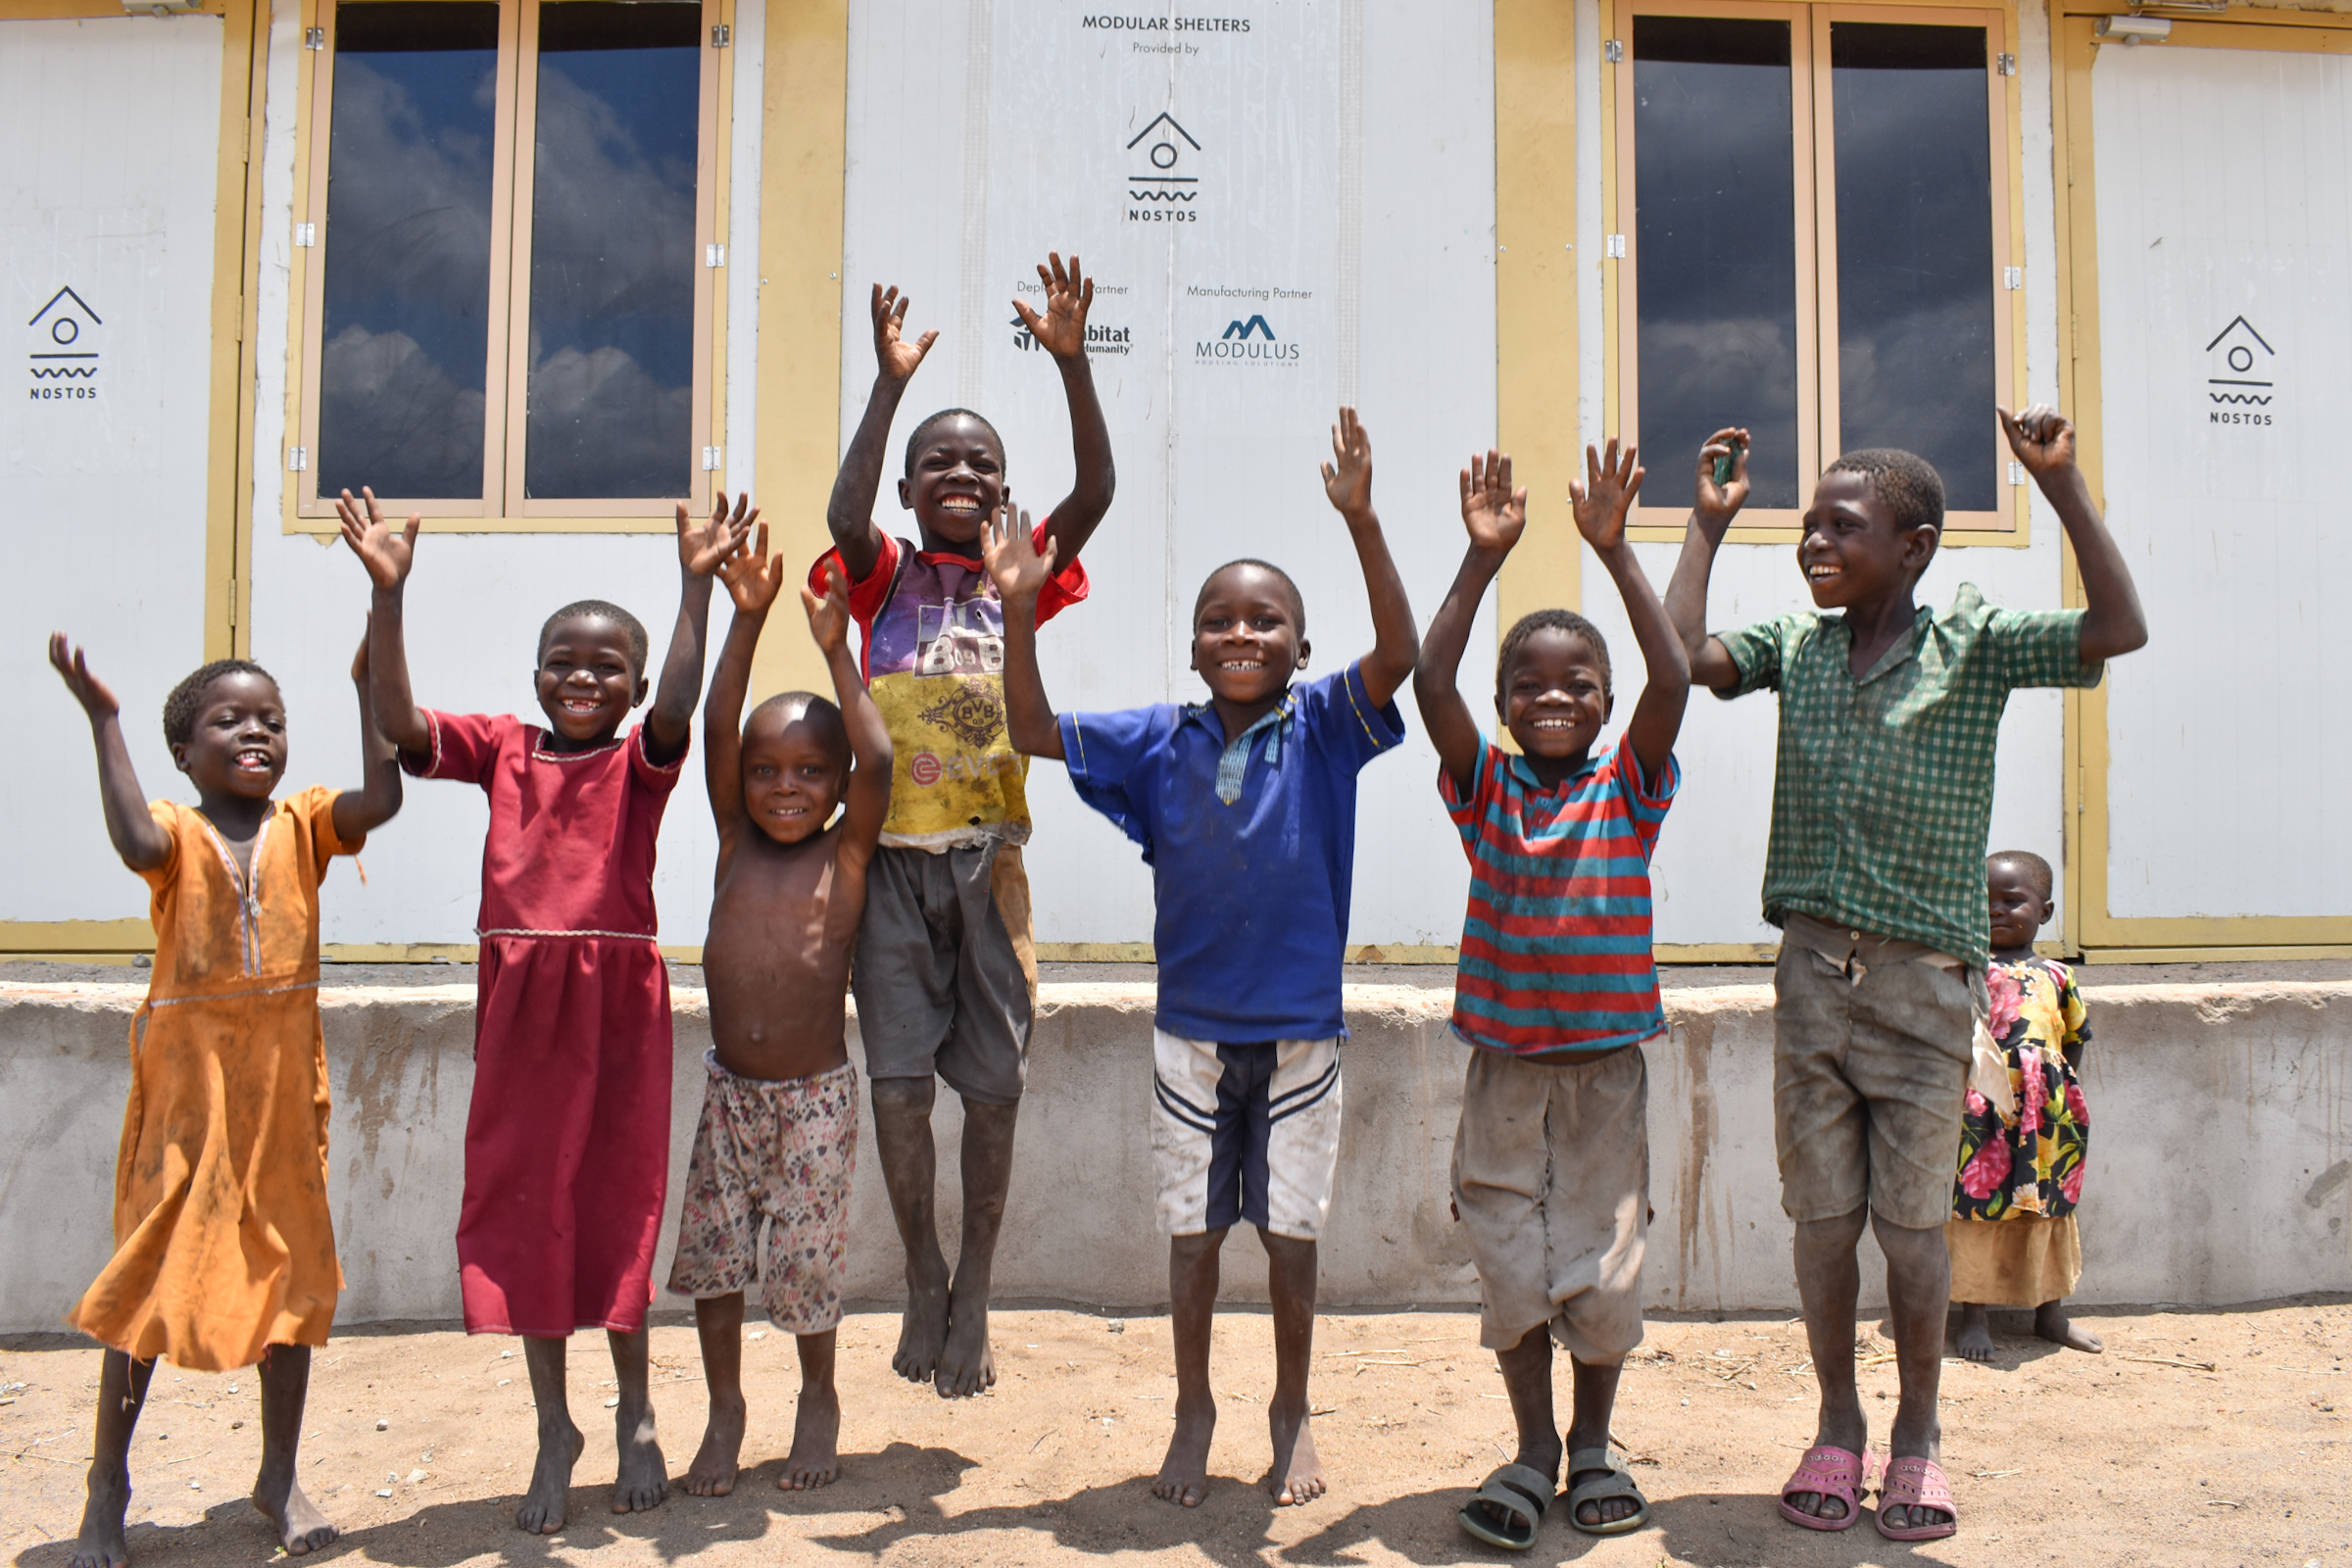 Seeing homes built in less than a day was like magic for the children in Phalombe.